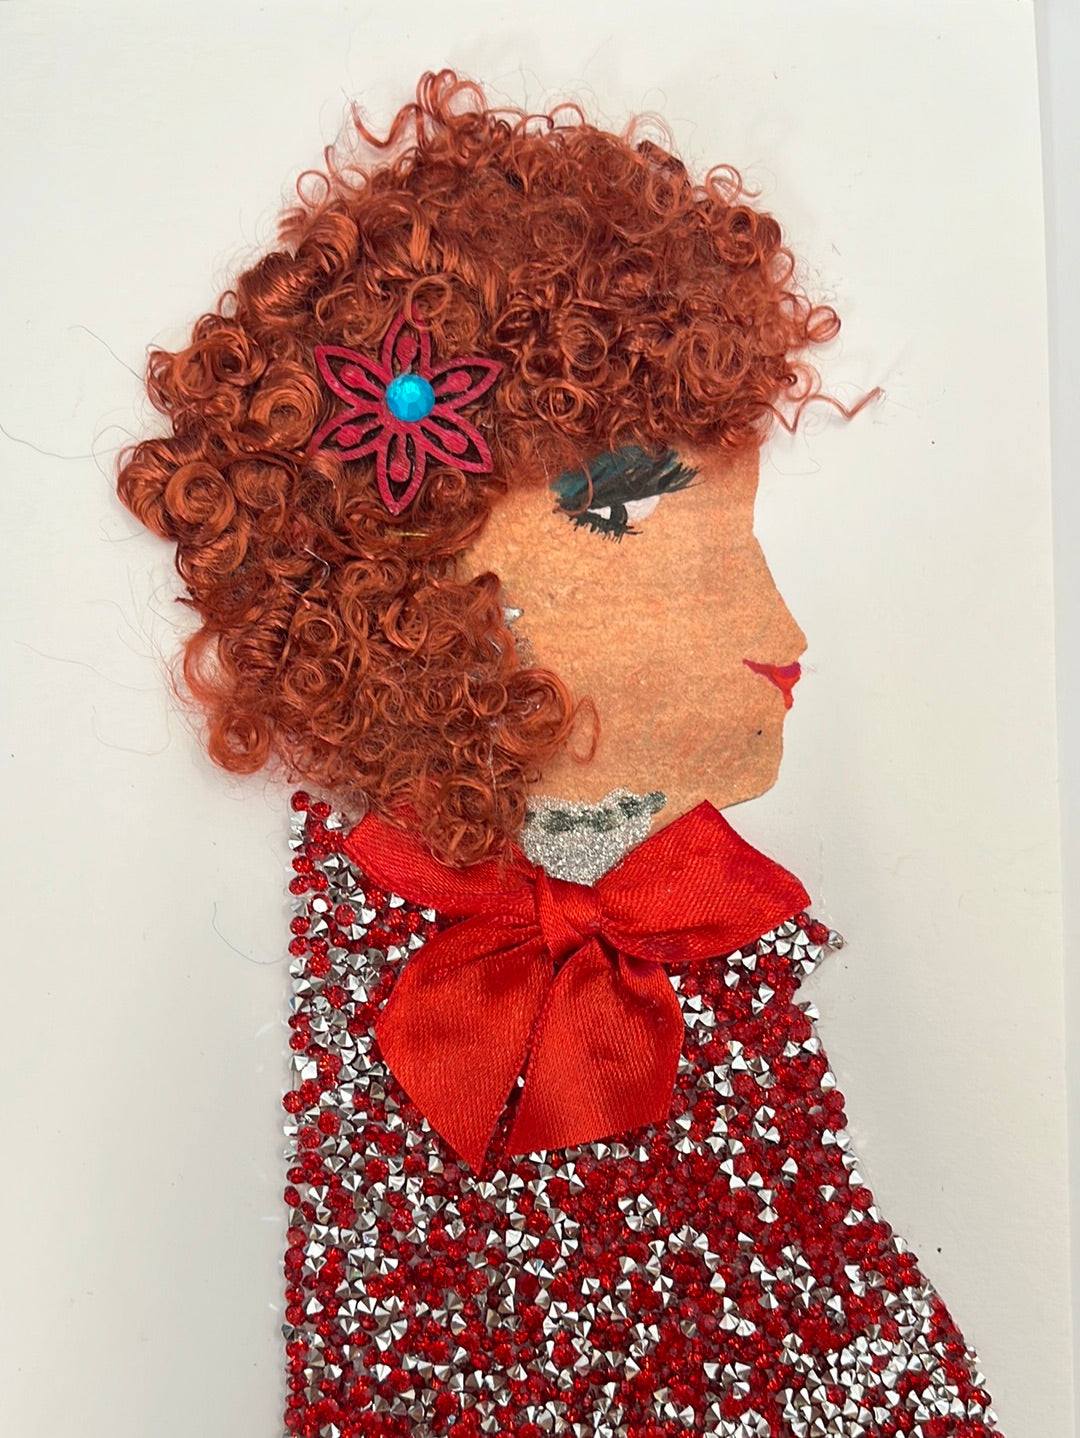 She wears a diamond red sparkly top with a large red bow on it. Her hair is red and curly.She has a flower in it. 